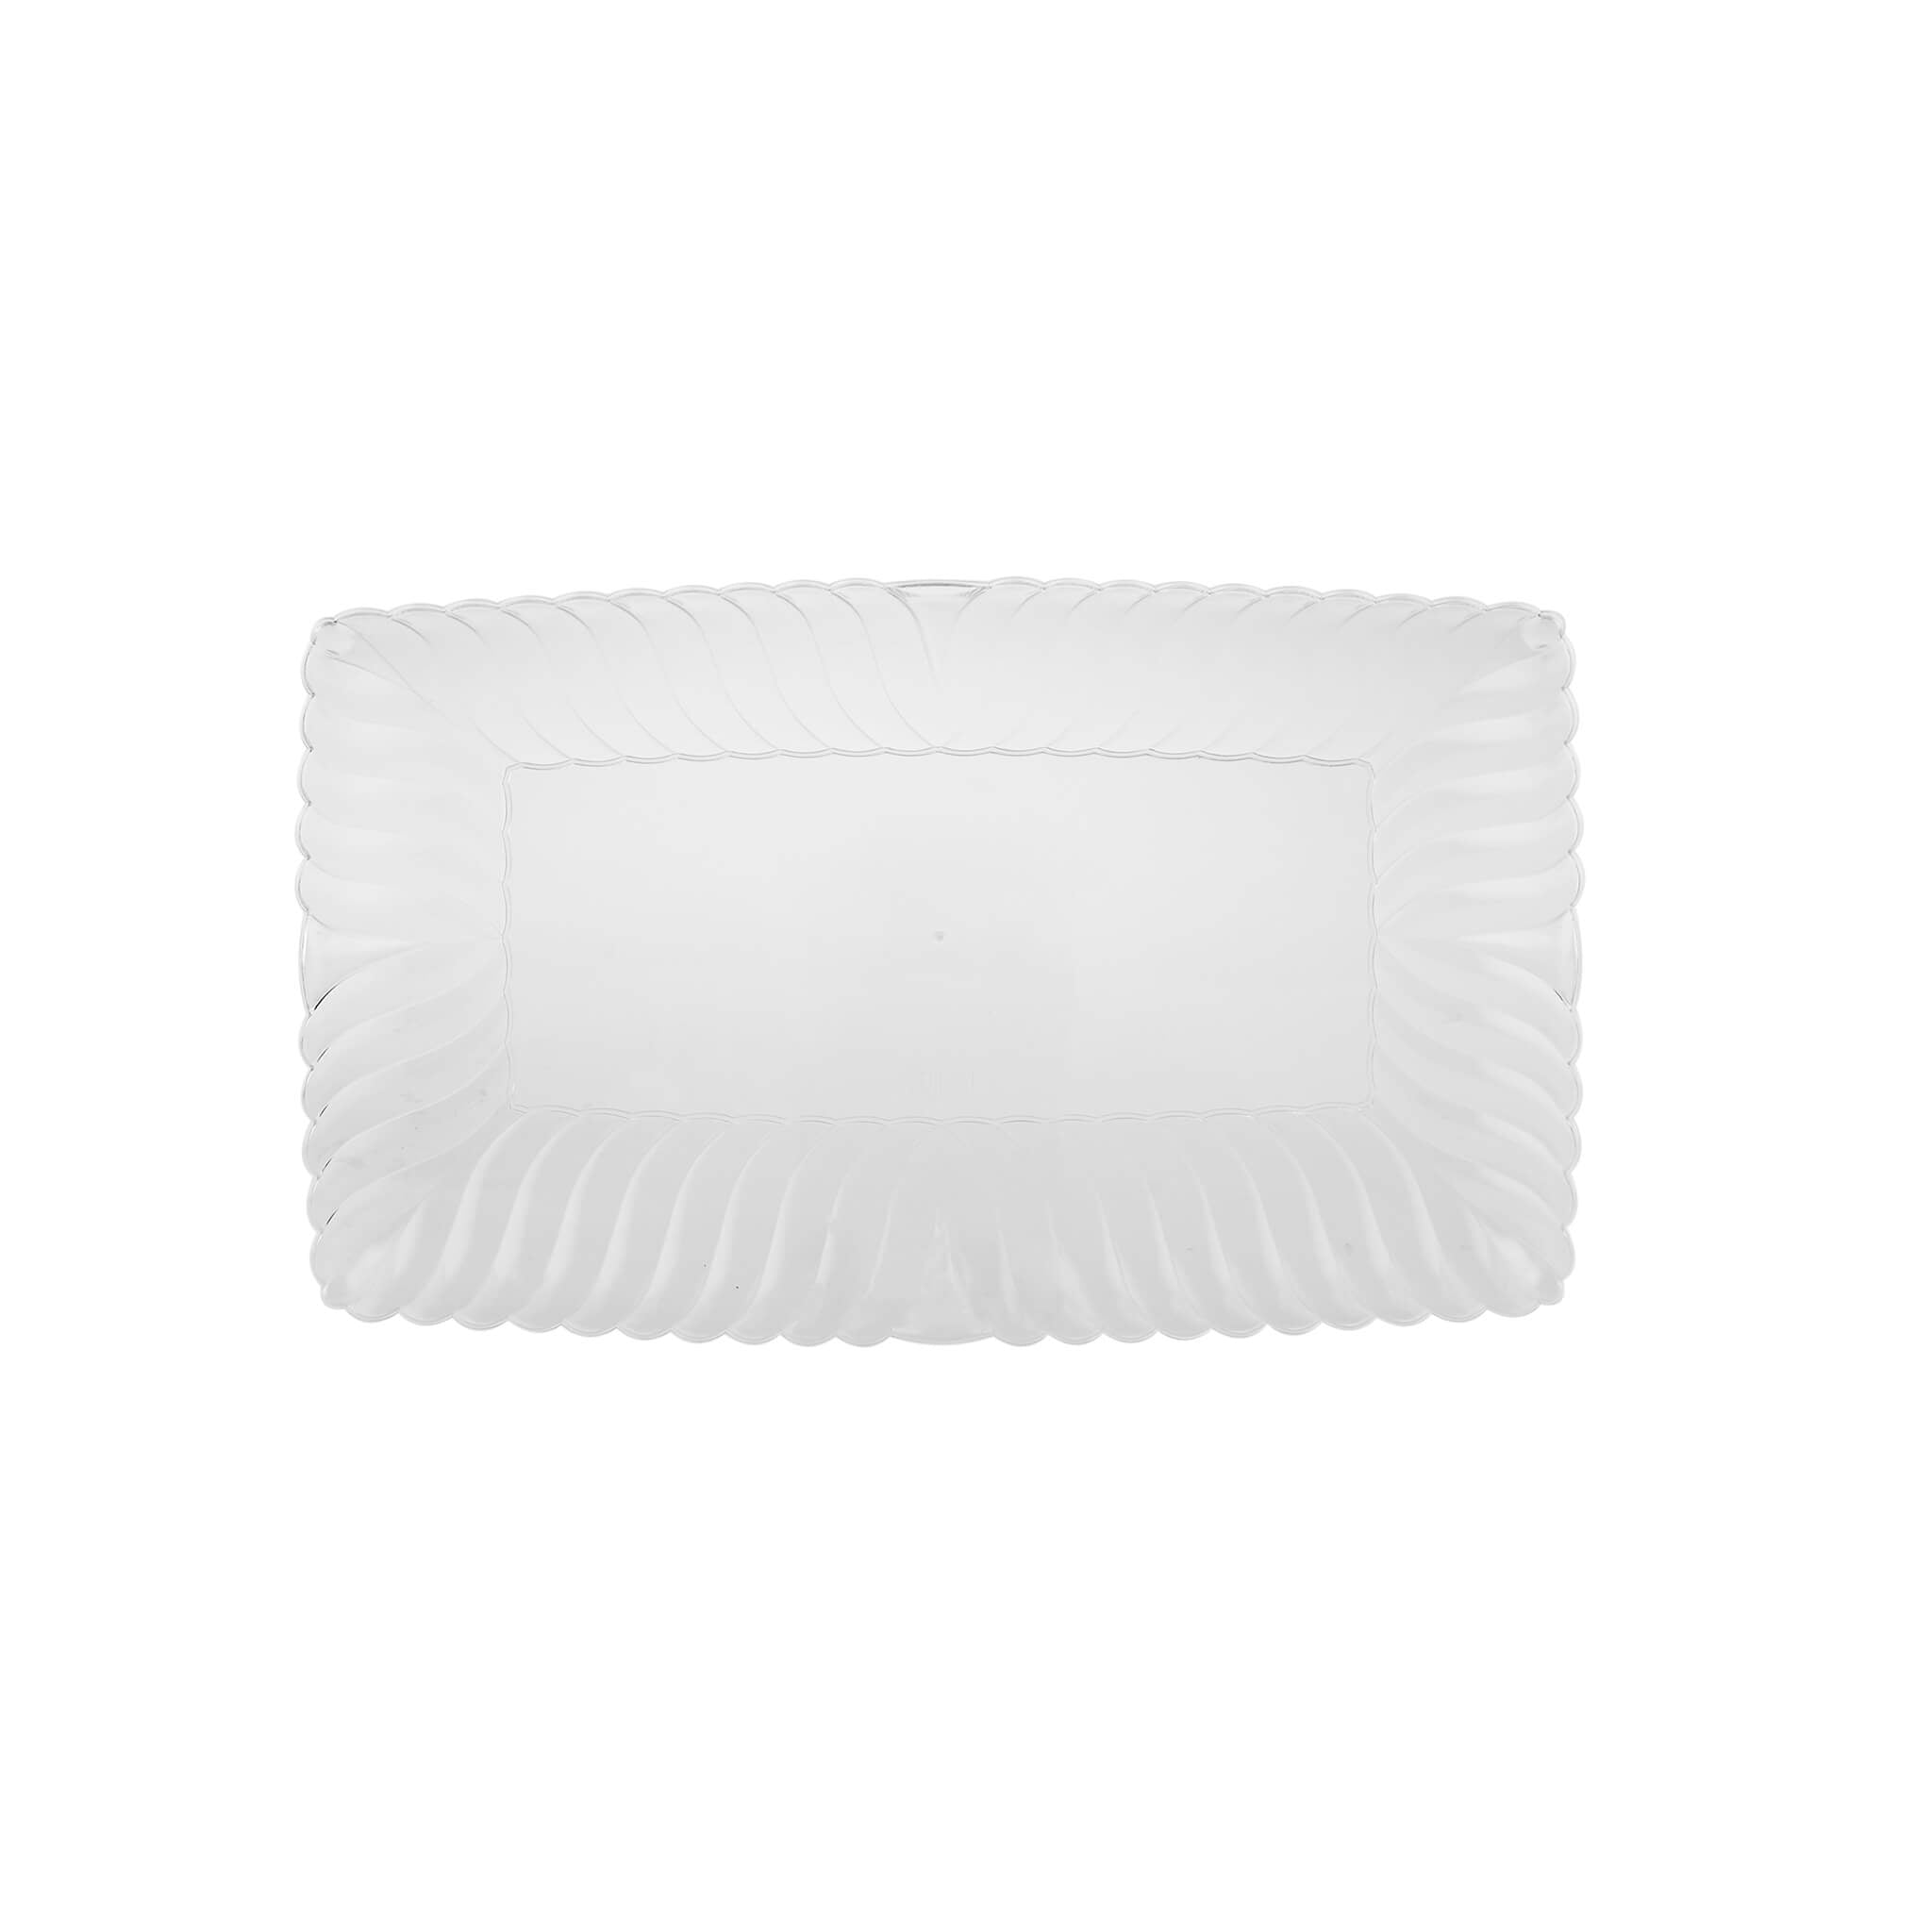 Premium Rectangle Flower Plate 4 Pieces - Hotpack Global